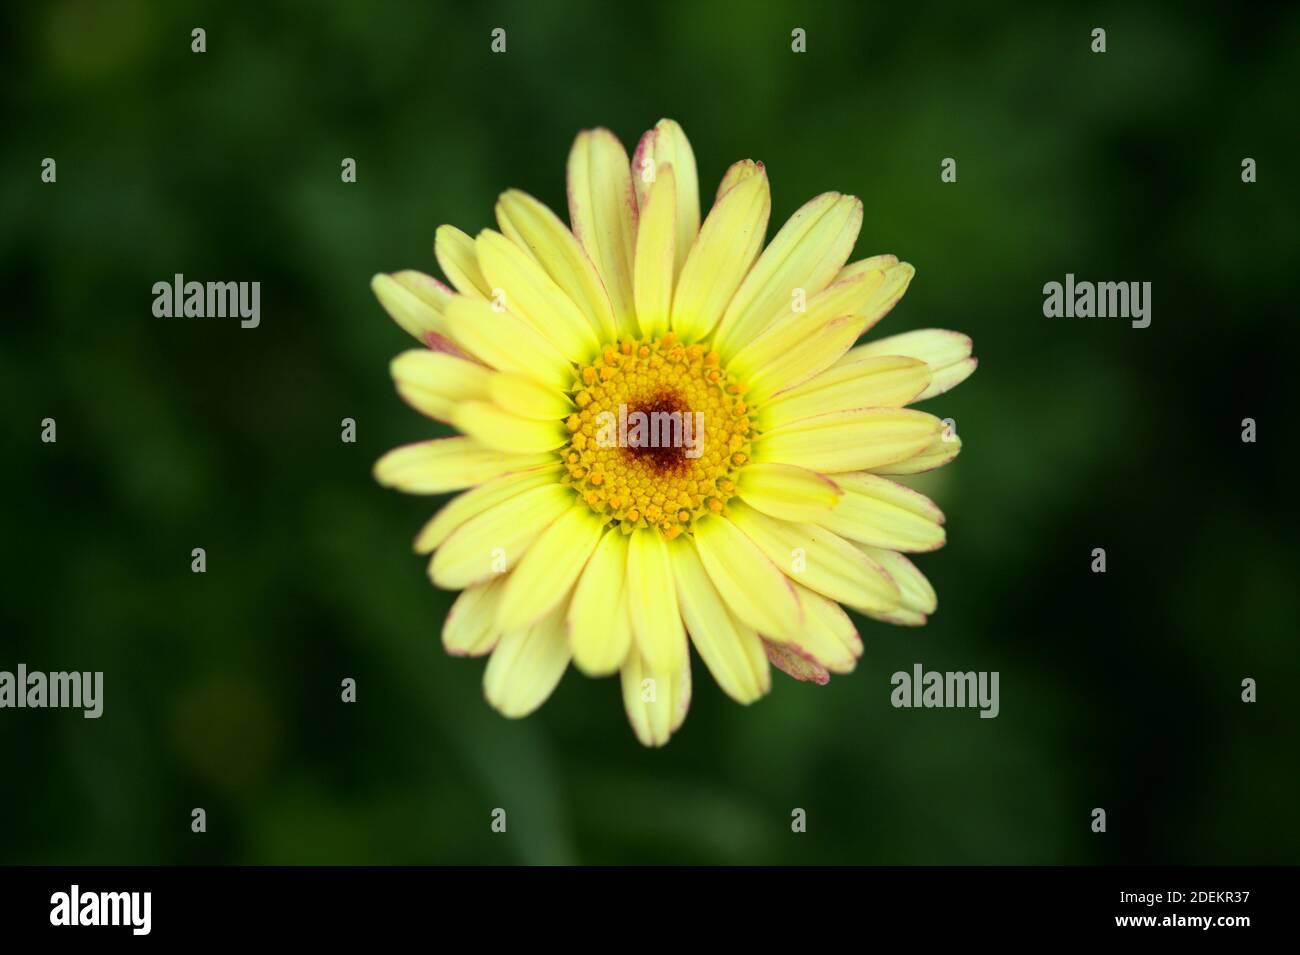 Natural macro background with marguerite daisies Stock Photo